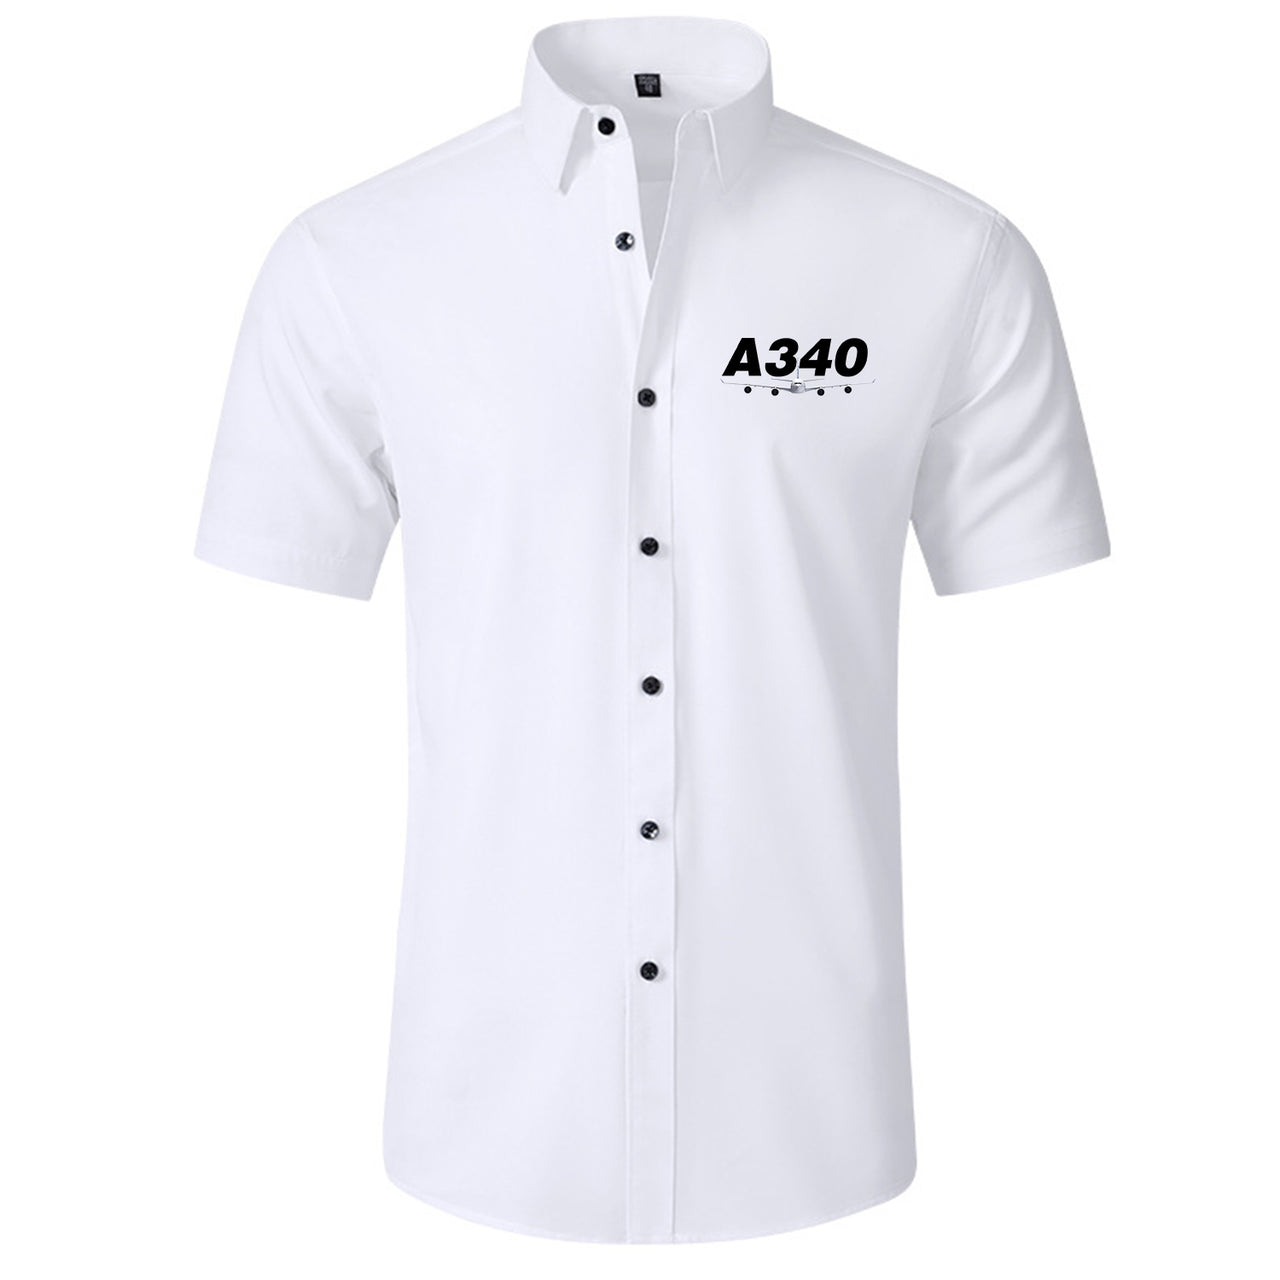 Super Airbus A340 Designed Short Sleeve Shirts